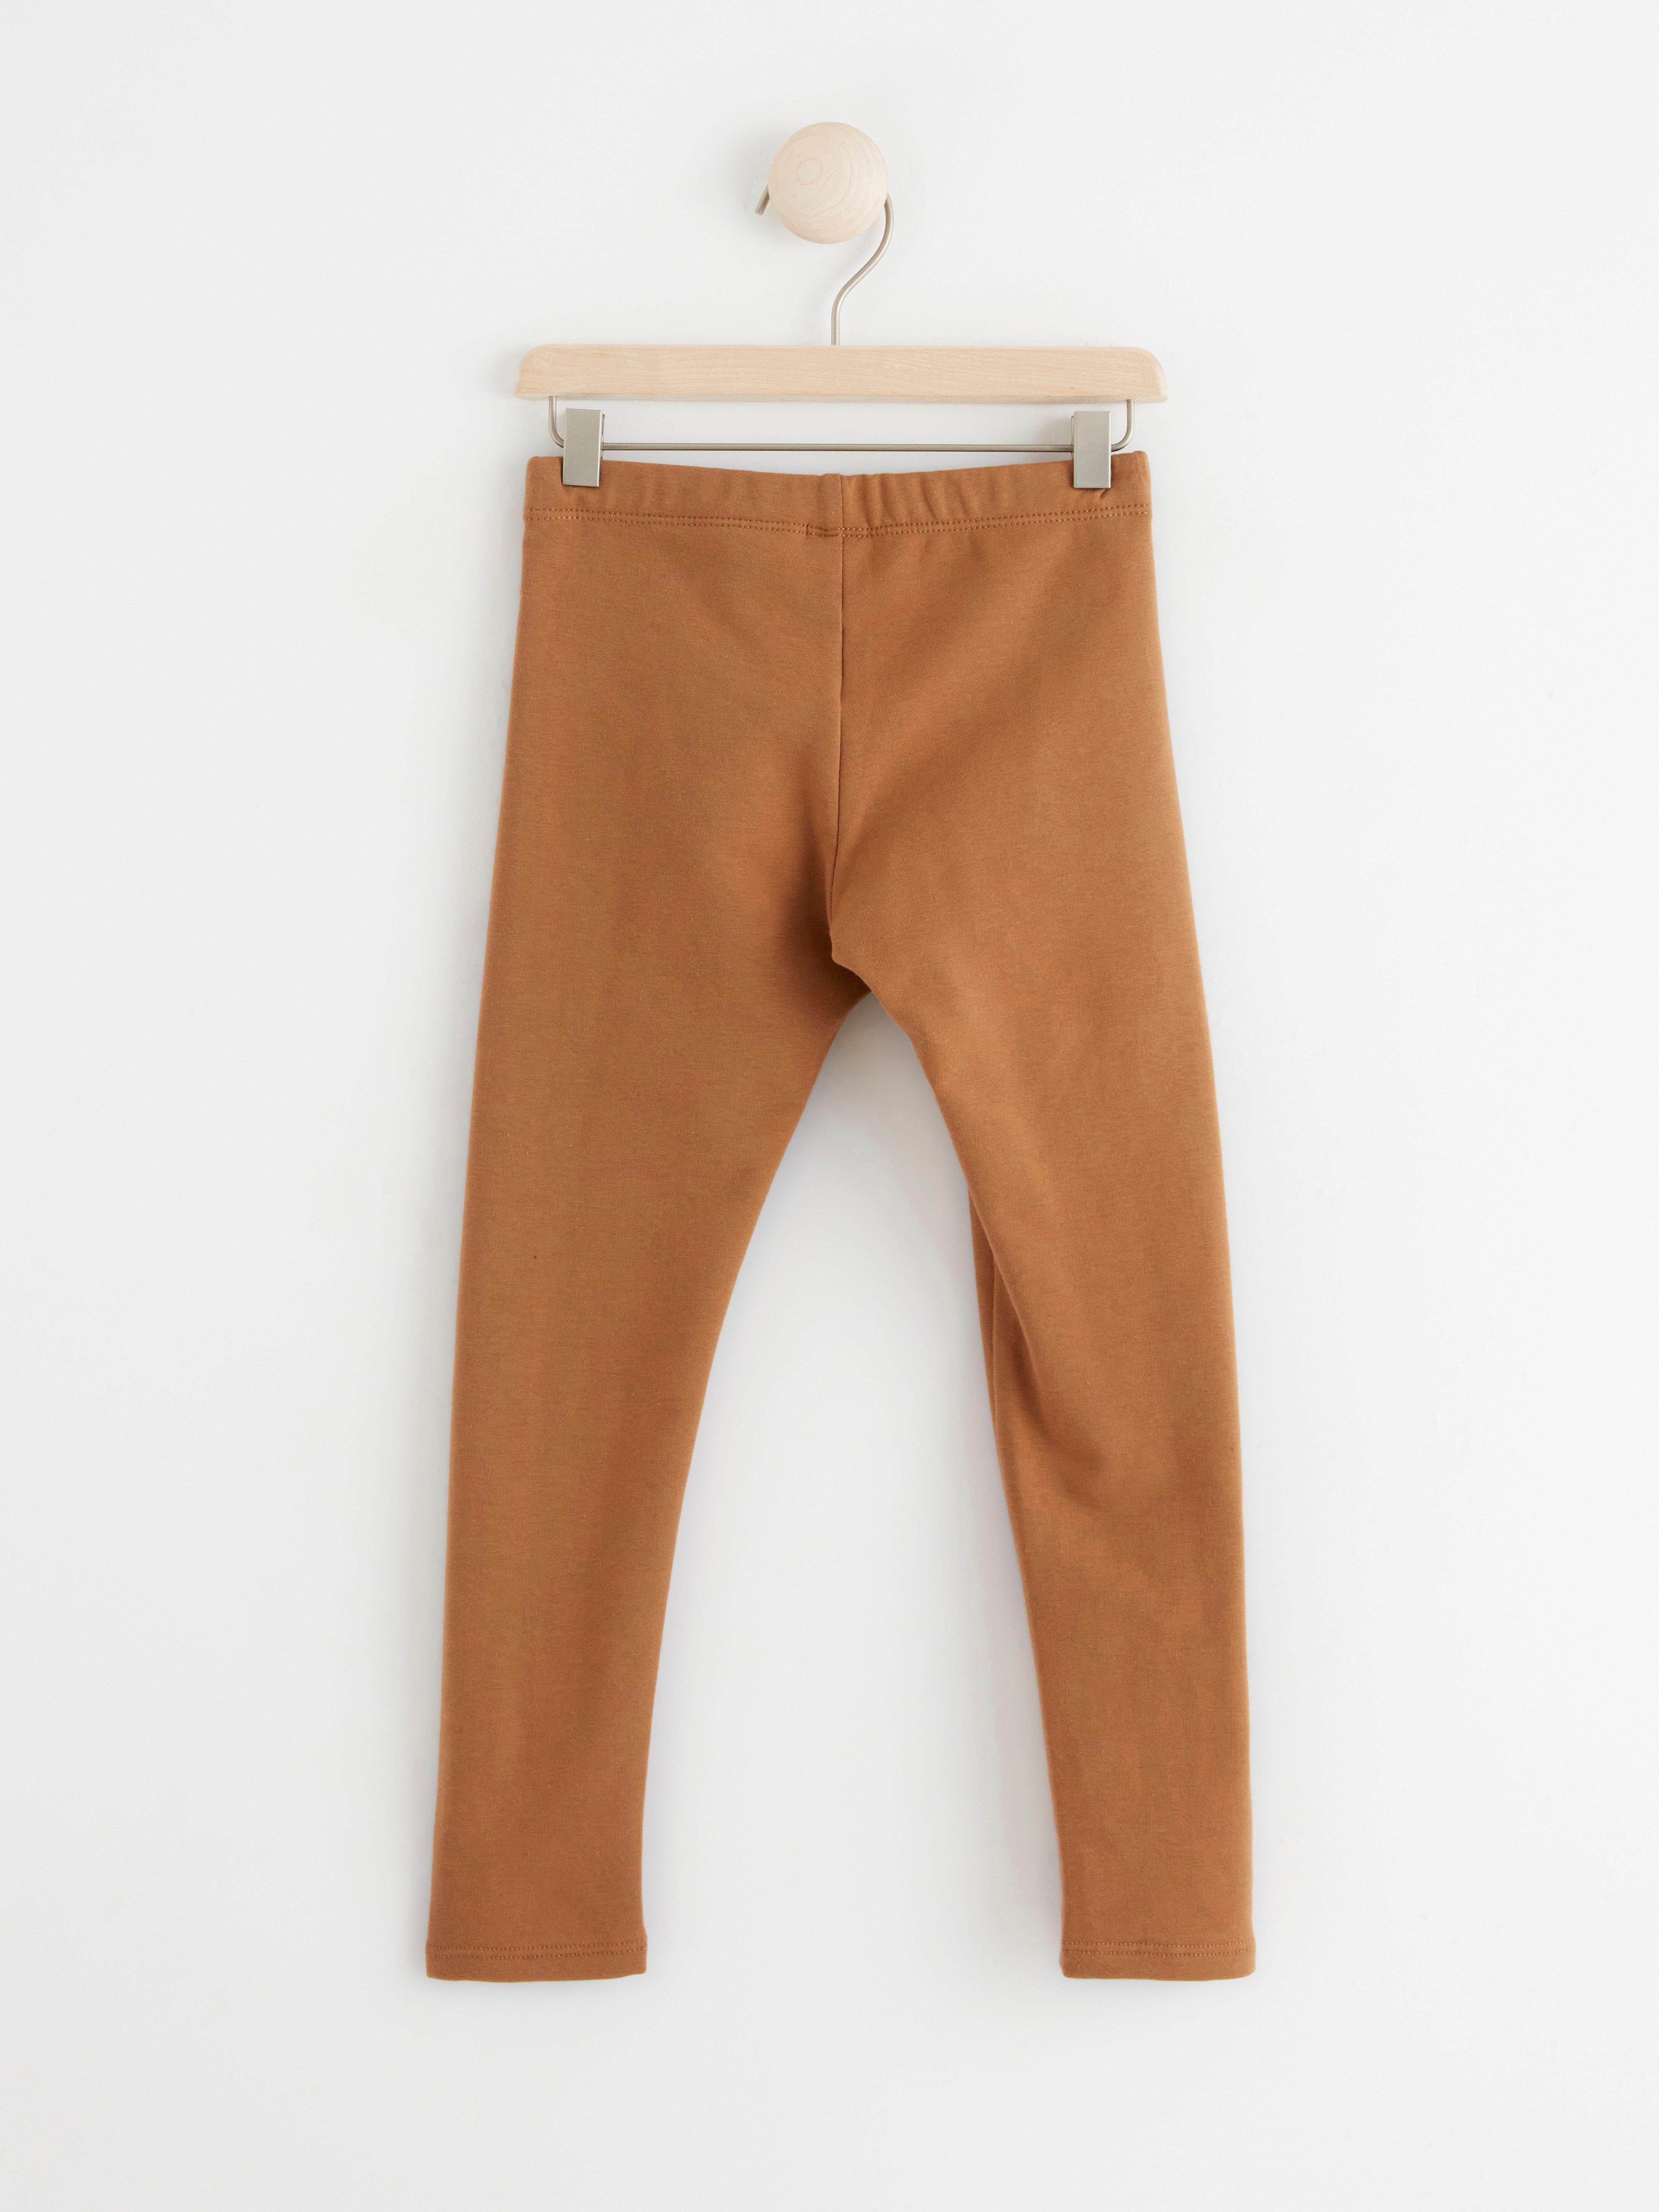 Brushed Inside Leggings with Pockets Brown